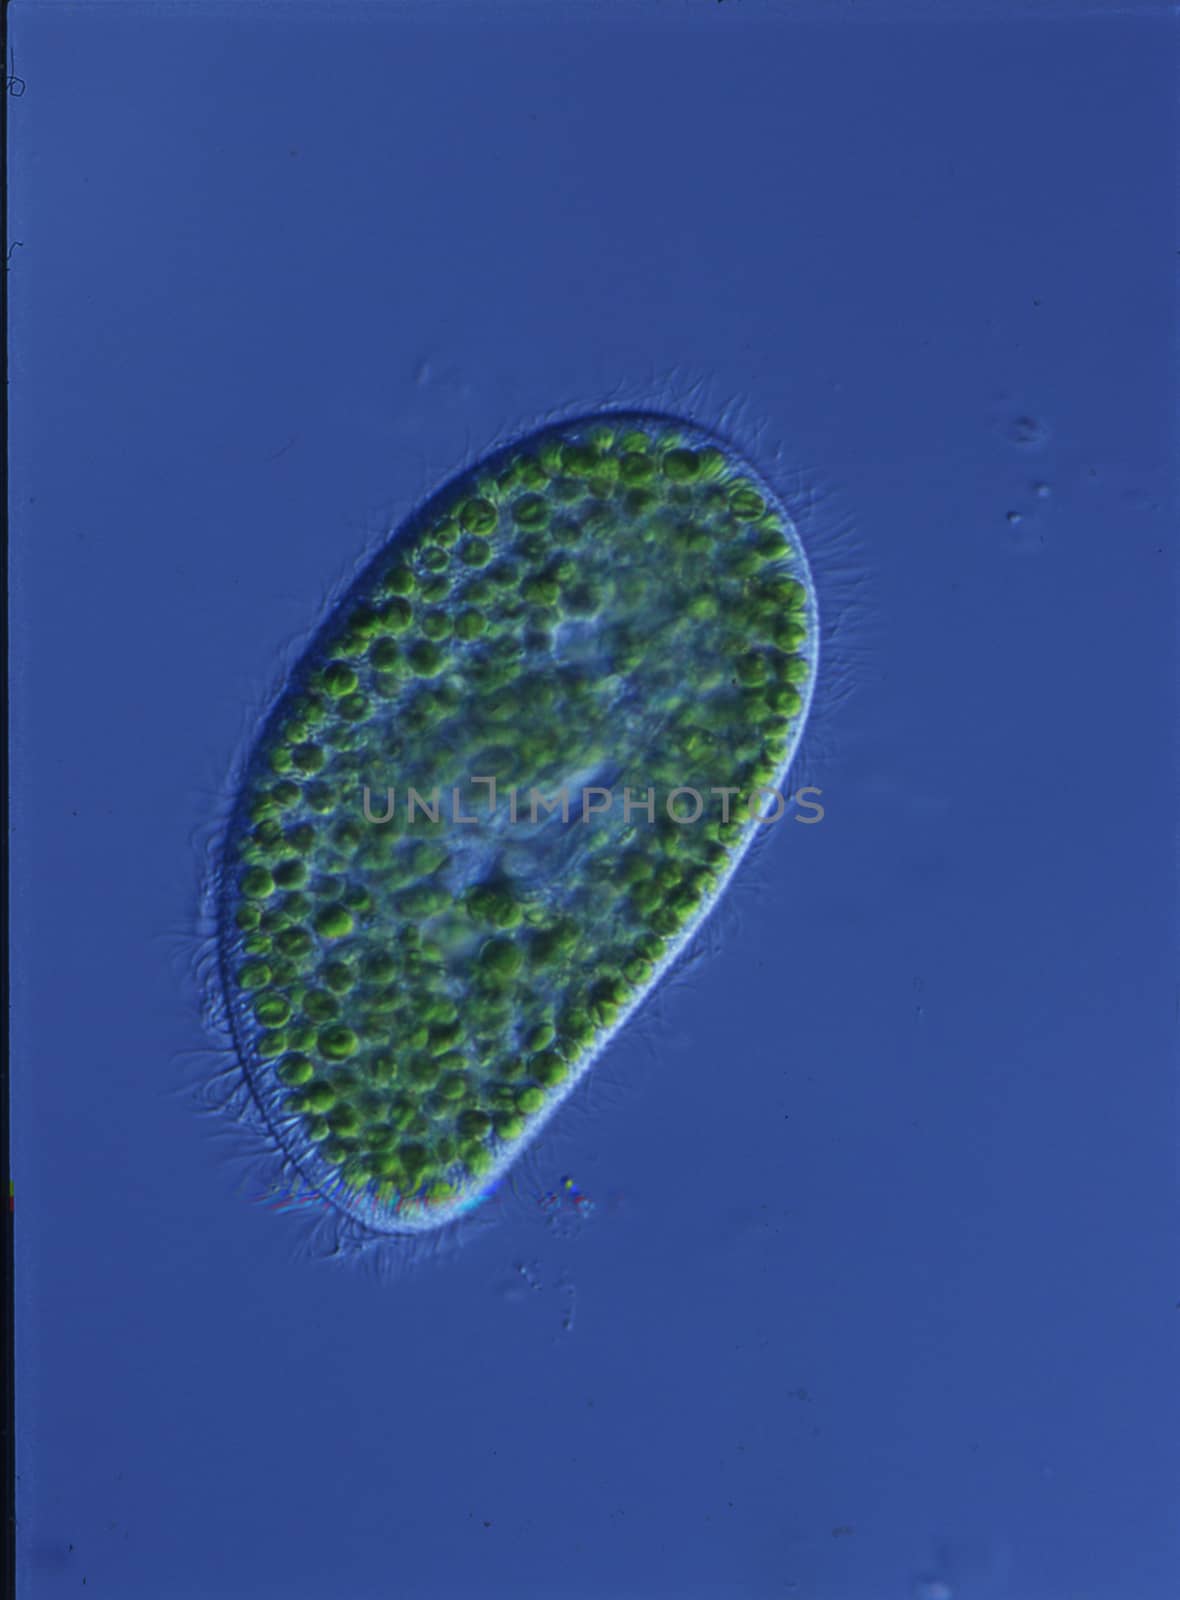 green slipper swims in the water under the microscope